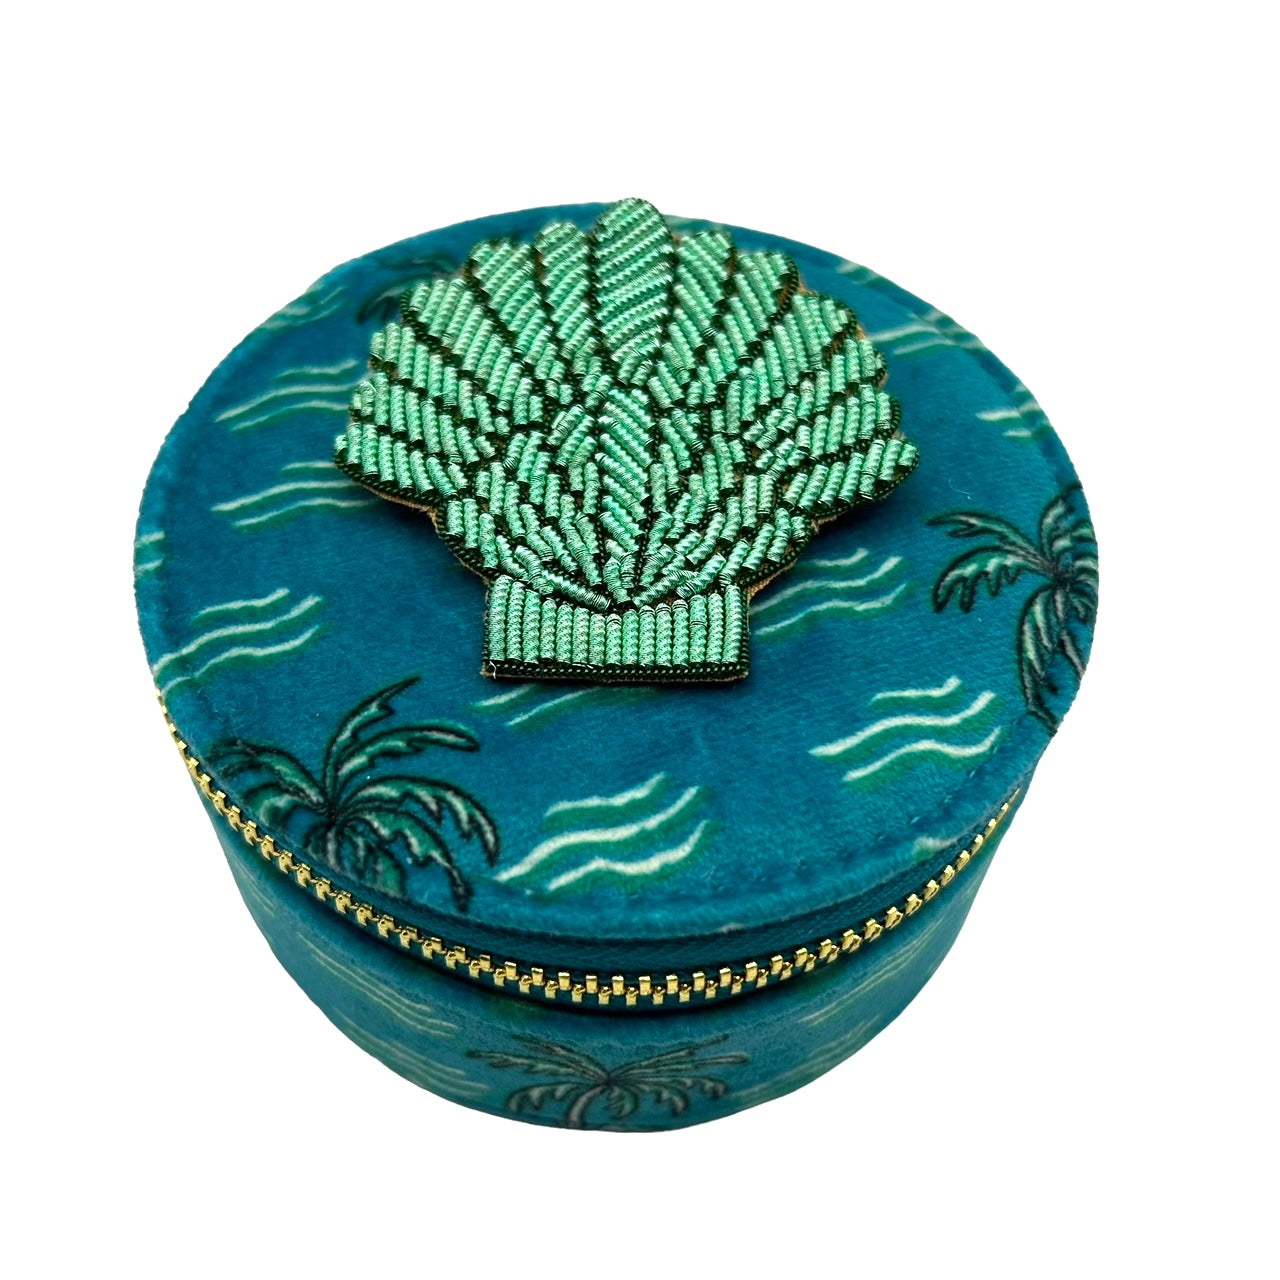 Jewellery travel pot in teal palm print with mint shell brooch